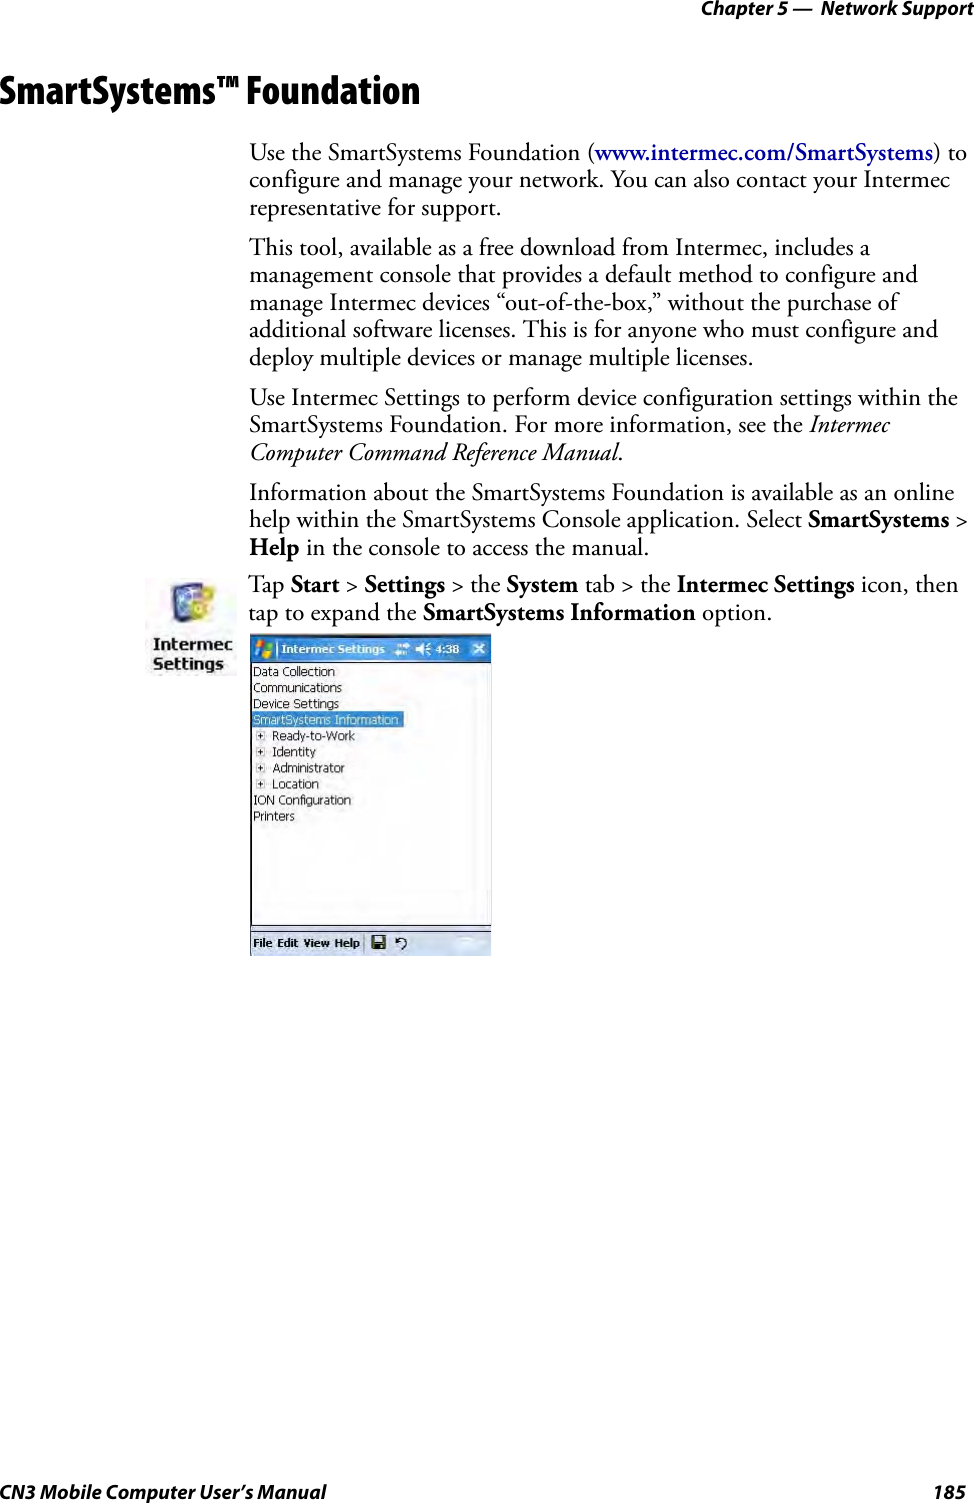 Chapter 5 —  Network SupportCN3 Mobile Computer User’s Manual 185SmartSystems™ FoundationUse the SmartSystems Foundation (www.intermec.com/SmartSystems) to configure and manage your network. You can also contact your Intermec representative for support.This tool, available as a free download from Intermec, includes a management console that provides a default method to configure and manage Intermec devices “out-of-the-box,” without the purchase of additional software licenses. This is for anyone who must configure and deploy multiple devices or manage multiple licenses.Use Intermec Settings to perform device configuration settings within the SmartSystems Foundation. For more information, see the Intermec Computer Command Reference Manual.Information about the SmartSystems Foundation is available as an online help within the SmartSystems Console application. Select SmartSystems &gt; Help in the console to access the manual.Tap Start &gt; Settings &gt; the System tab &gt; the Intermec Settings icon, then tap to expand the SmartSystems Information option.